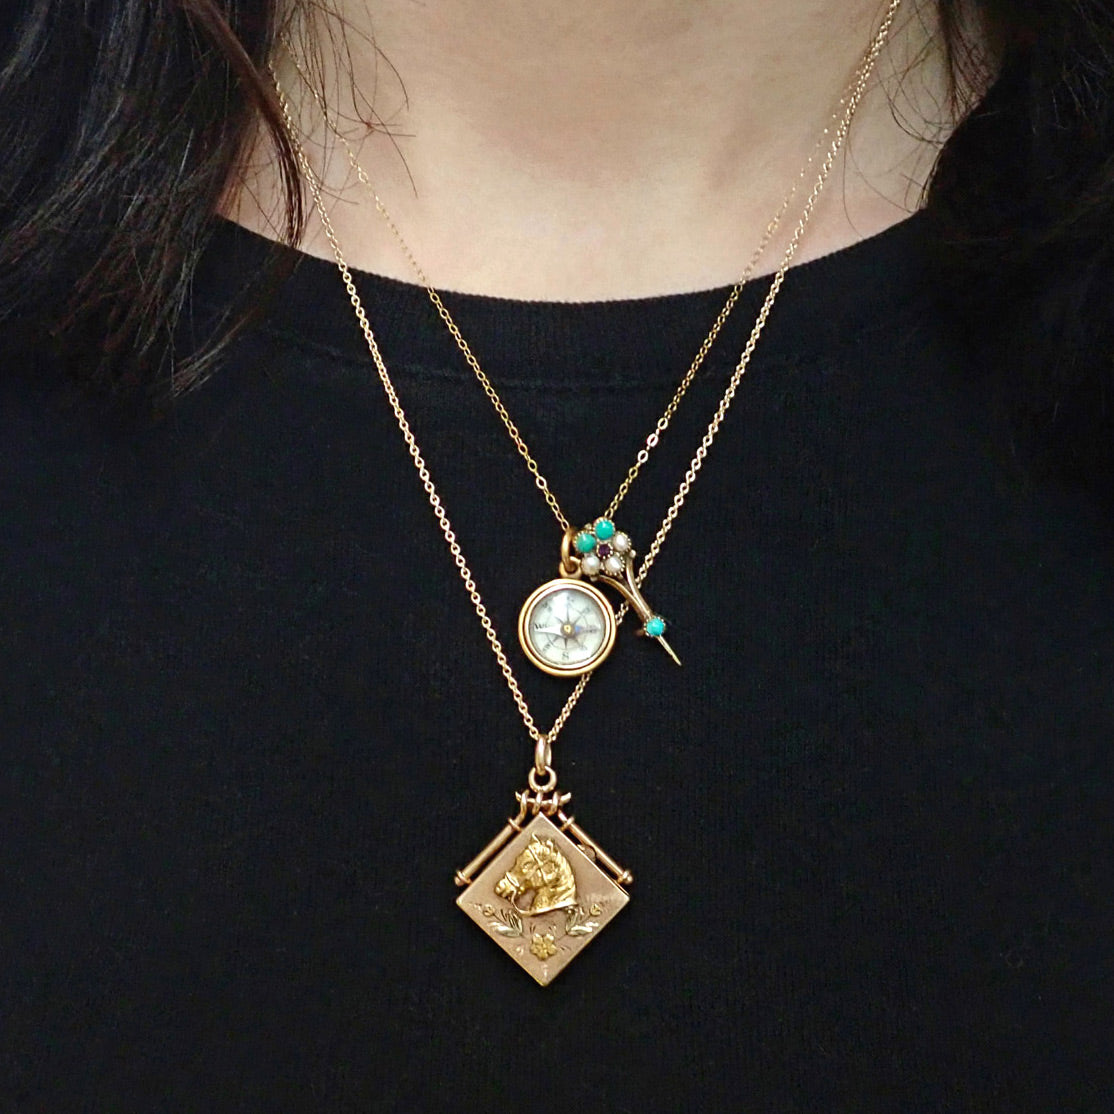 Victorian layered antique gold necklaces, horse locket, compass pendant from Doyle & Doyle 107658N 107656P 107576N